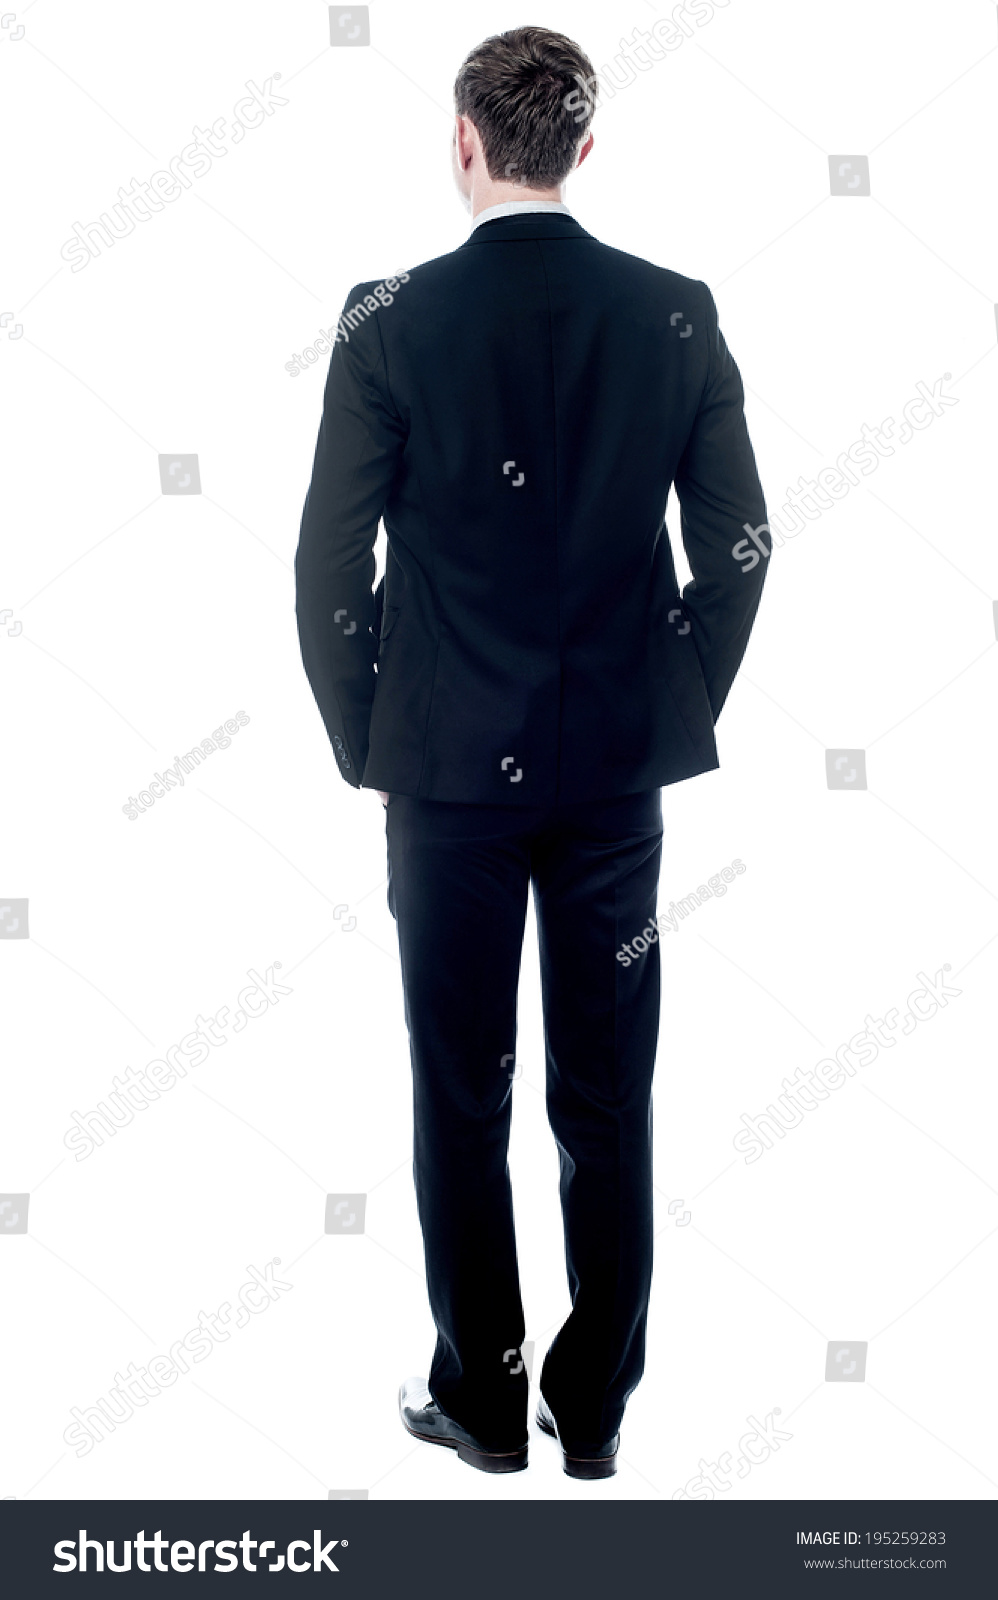 Business Man Back Looking Something Stock Photo 195259283 - Shutterstock